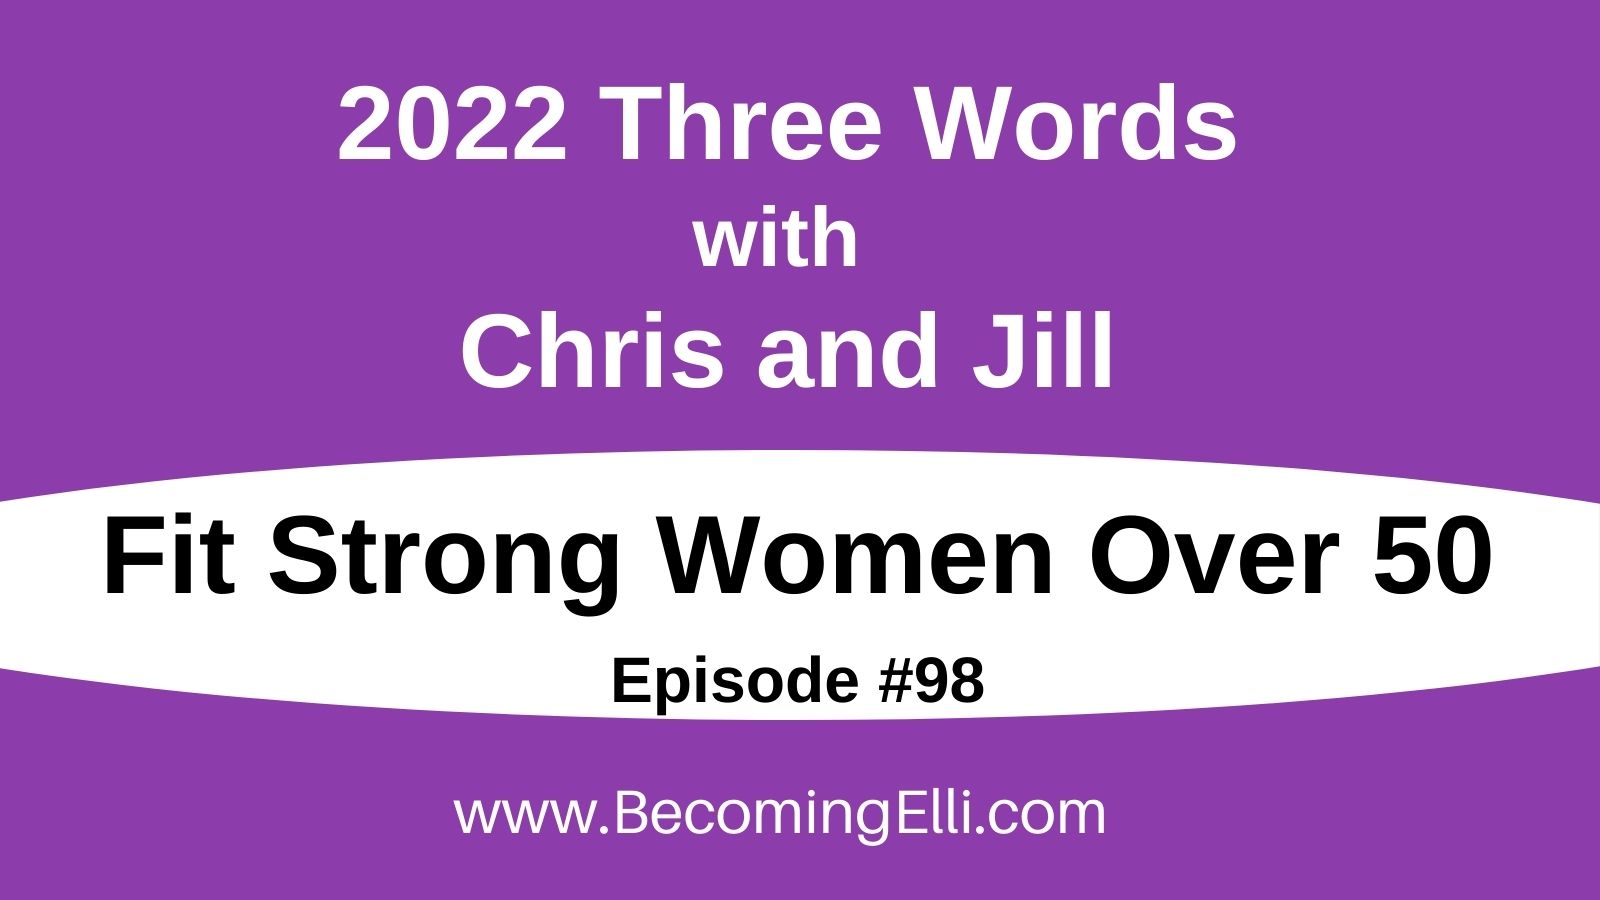 2022 Three words with Chris and Jill - be